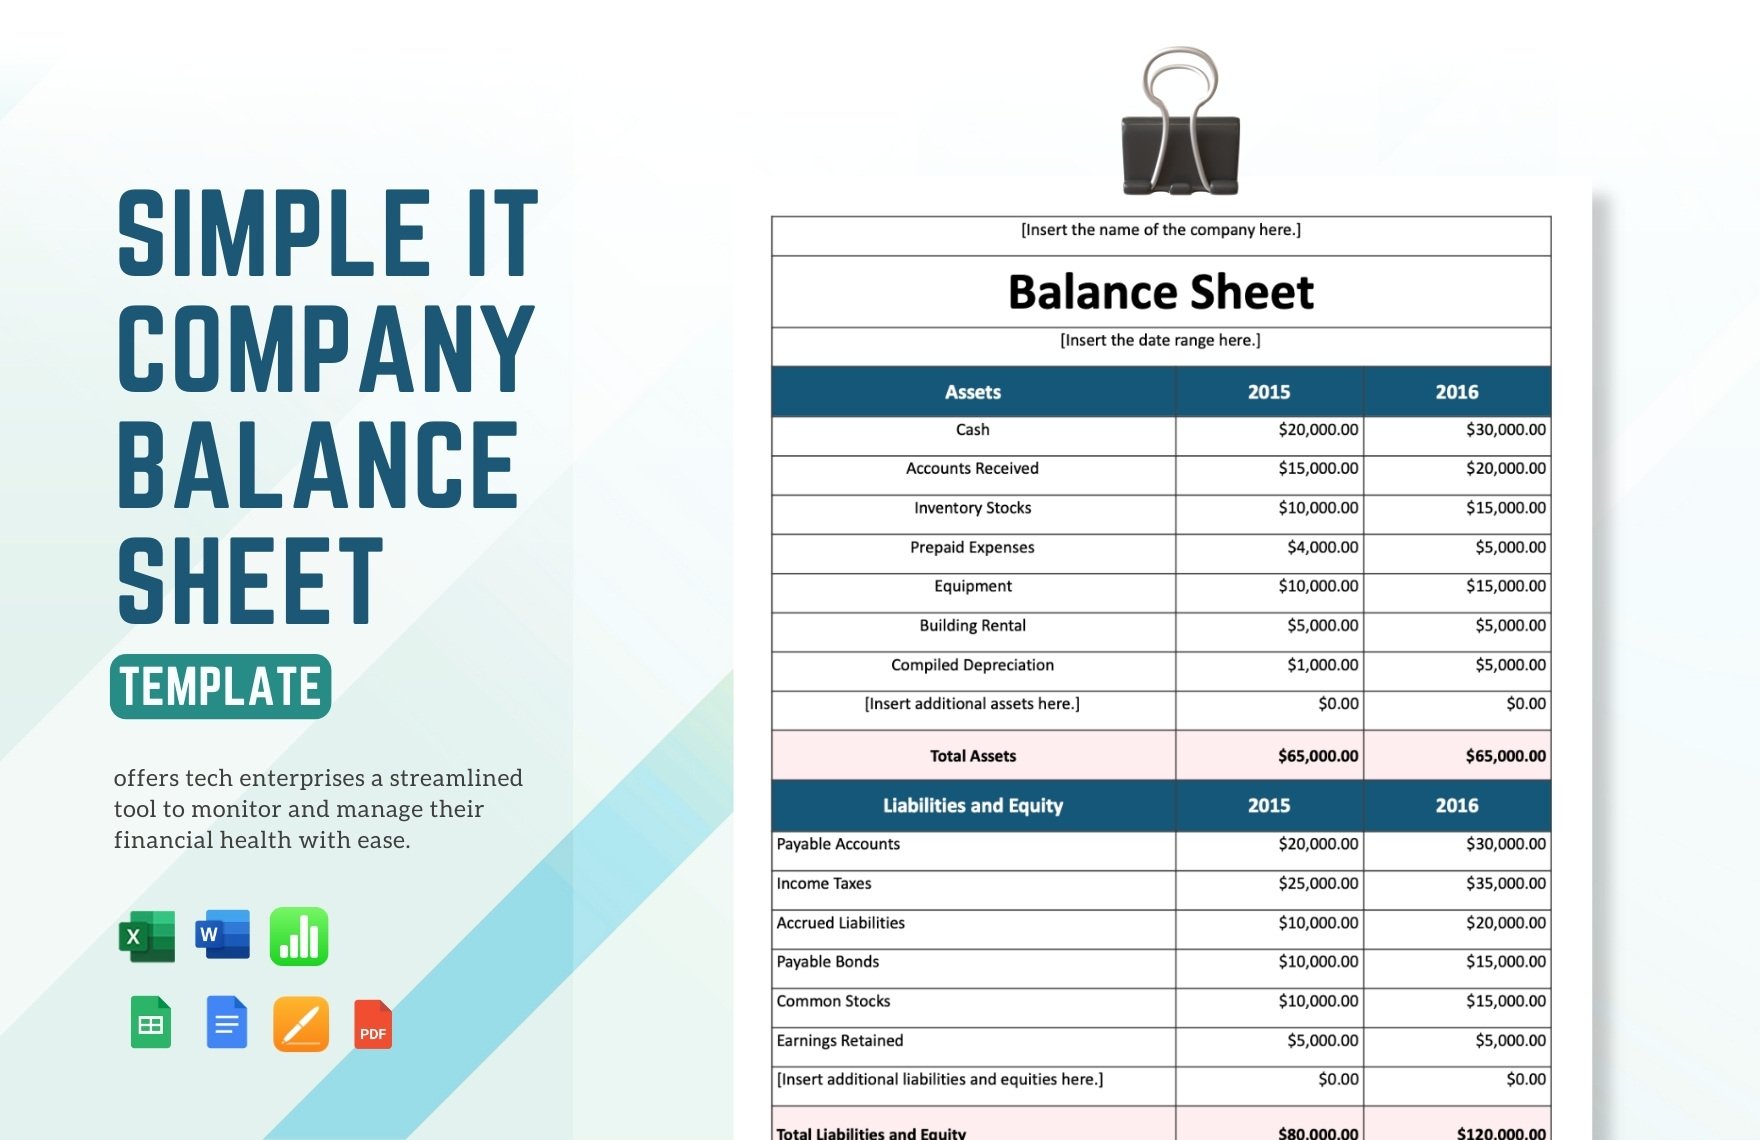 Simple IT Company Balance Sheet Template in Word, Google Docs, Excel, PDF, Google Sheets, Apple Pages, Apple Numbers